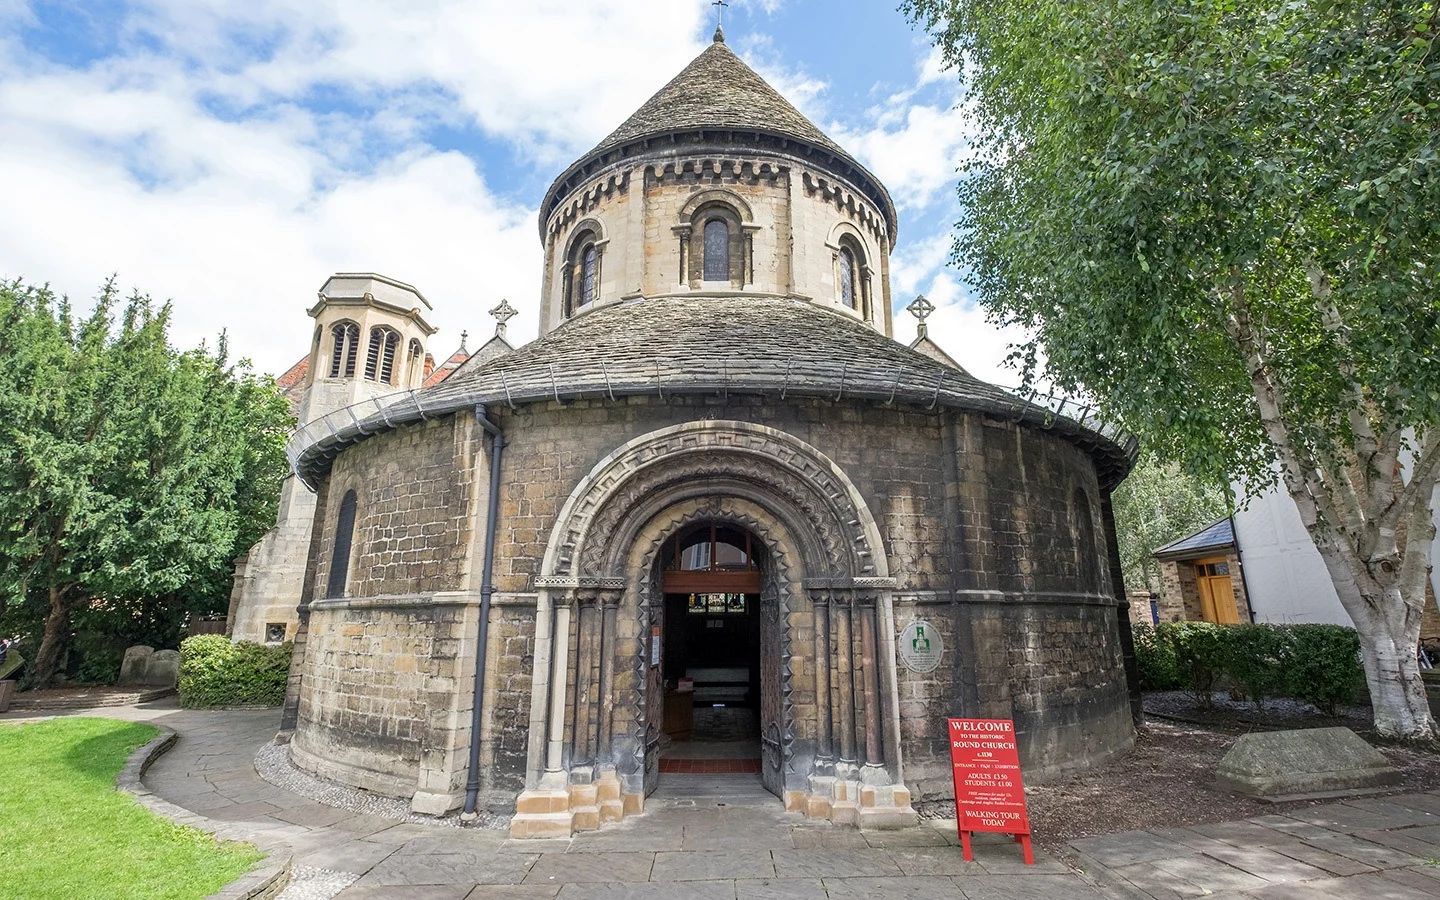 The Church of the Holy Sepulchre, generally known as The Round Church